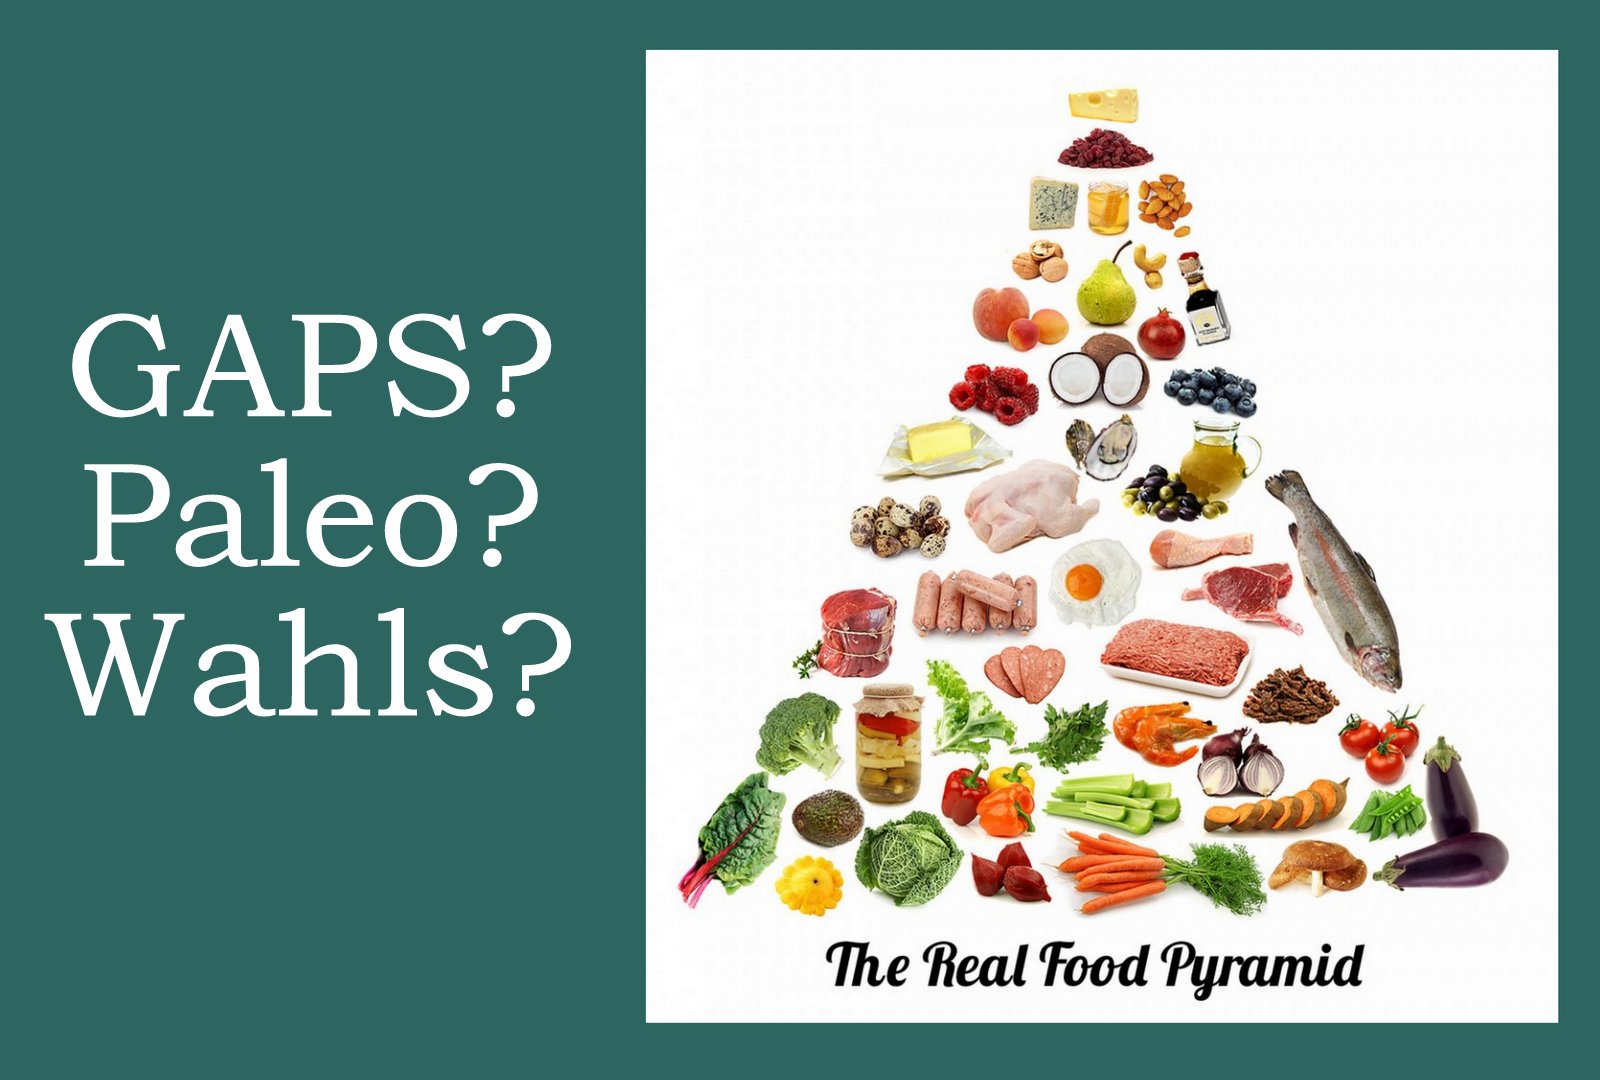 a pyramid made of real foods with the words: Gaps? Paleo? Wahls?